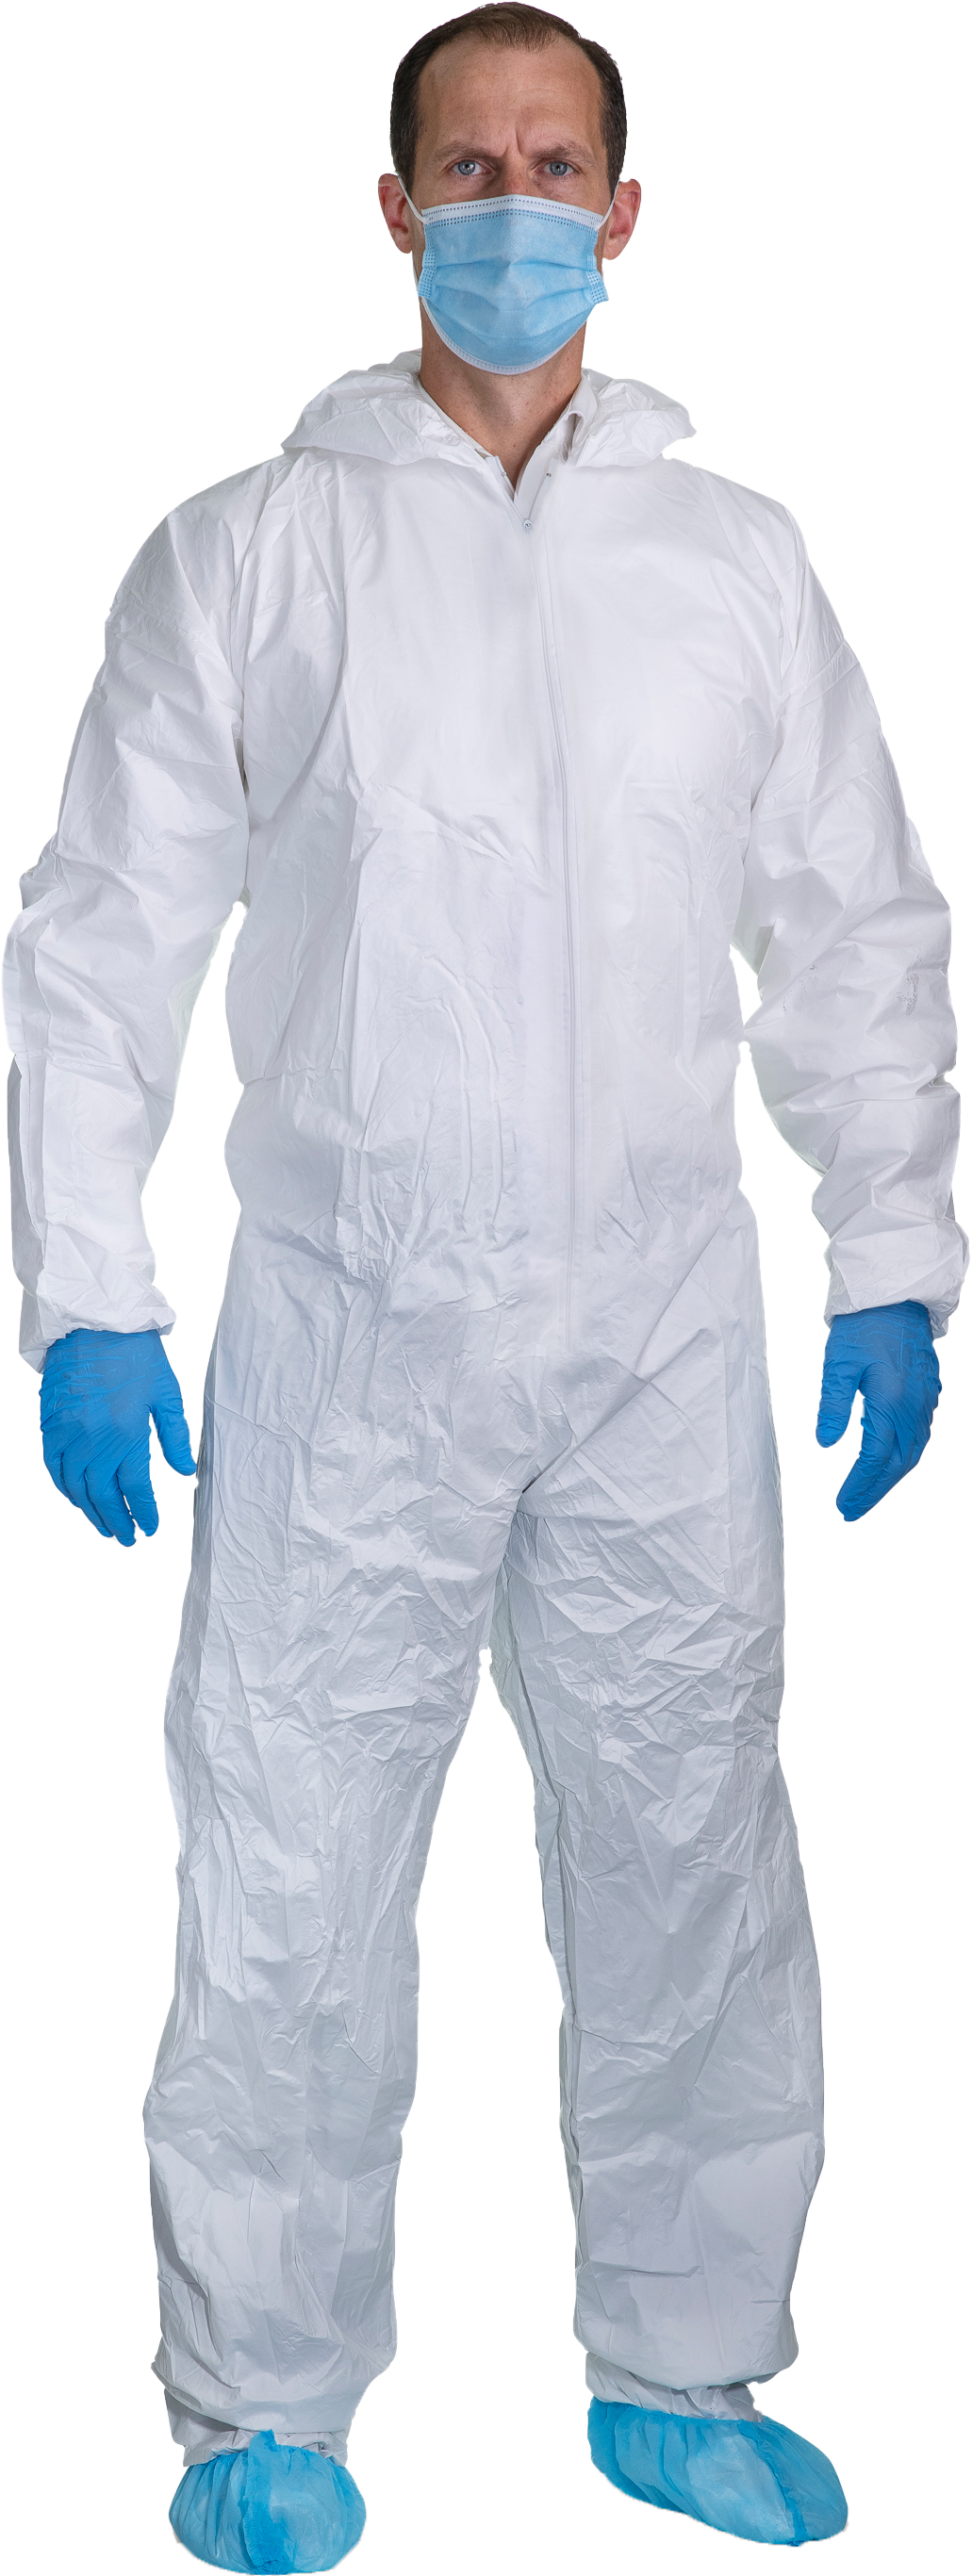 Disposable Safety Full Body Protection Suit Coverall Protective